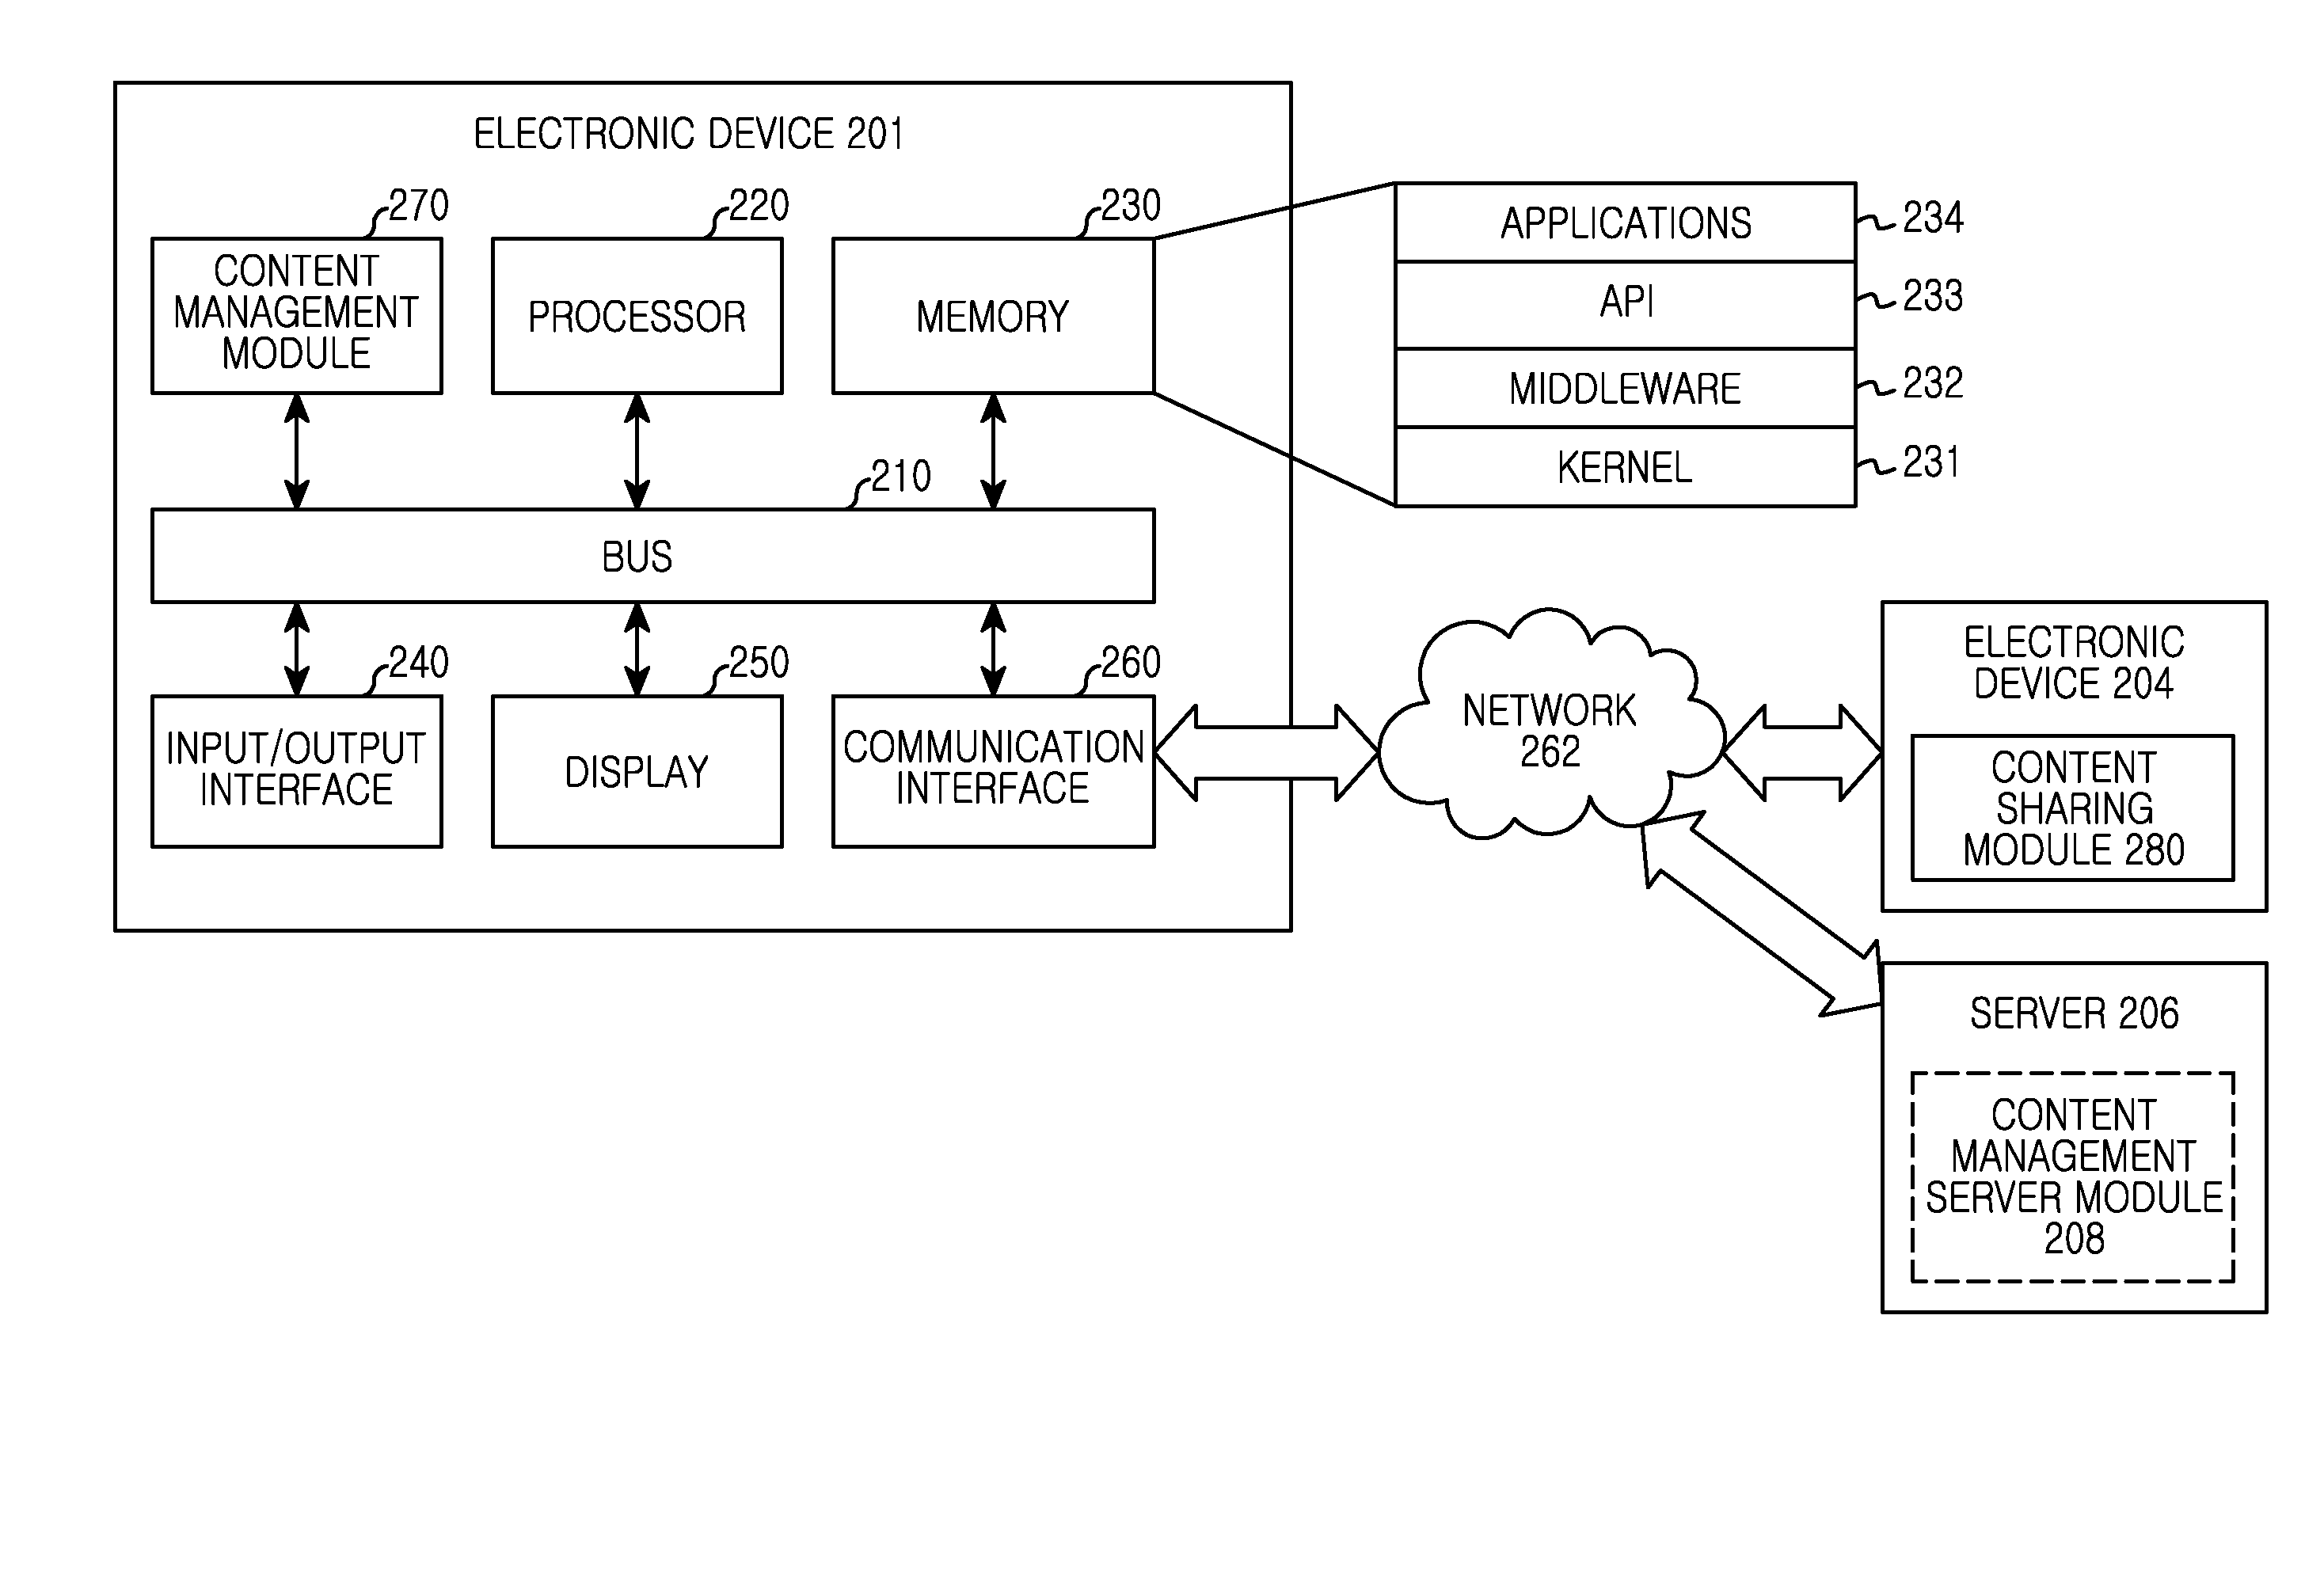 Method and apparatus for sharing content between electronic devices